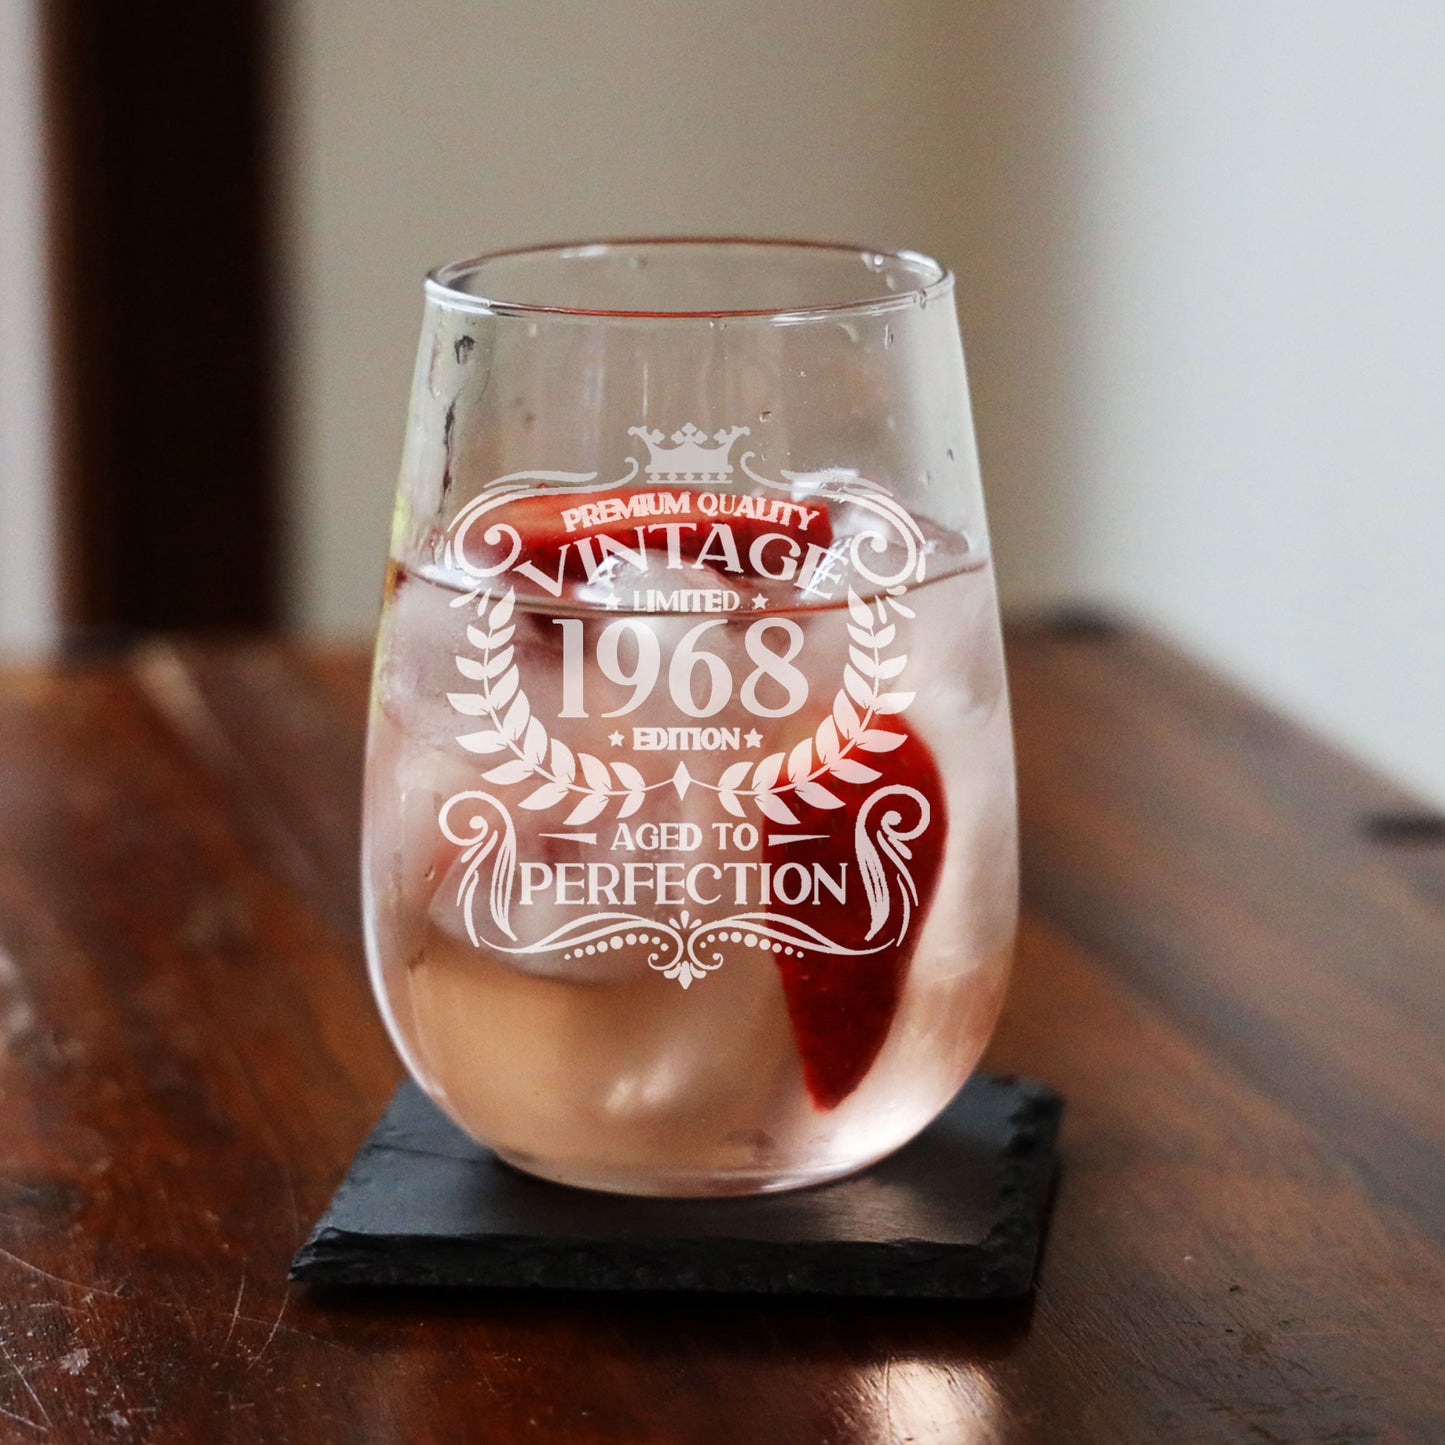 Vintage 1968 55th Birthday Engraved Stemless Gin Glass Gift  - Always Looking Good -   